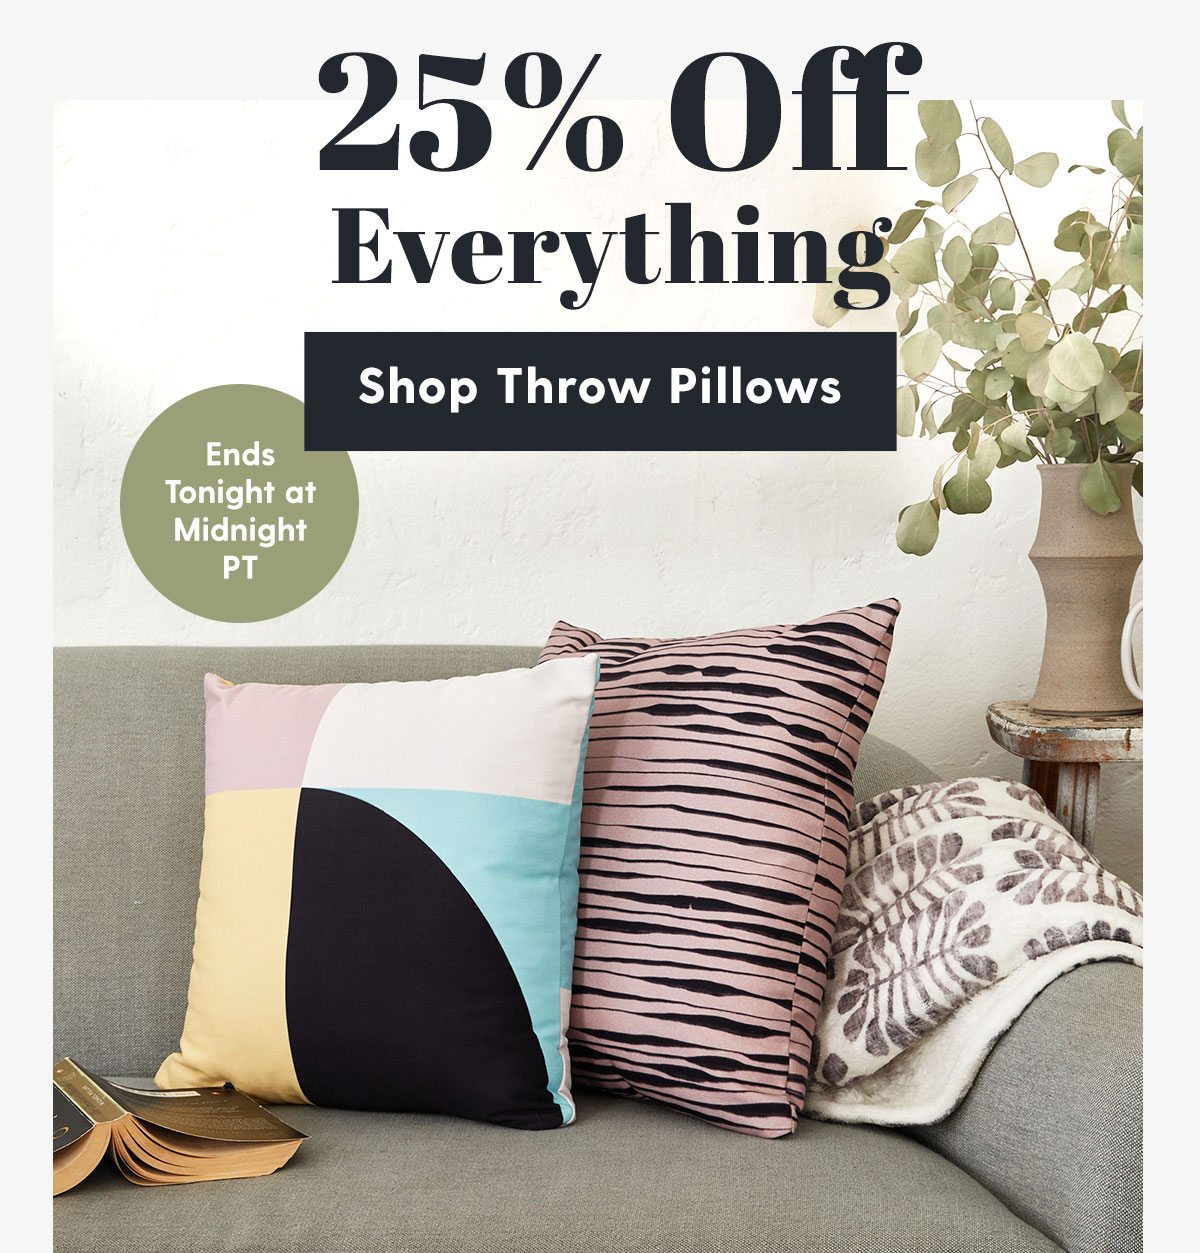 25% Off Everything Today. Ends Tonight at Midnight PT. Shop Throw Pillows →